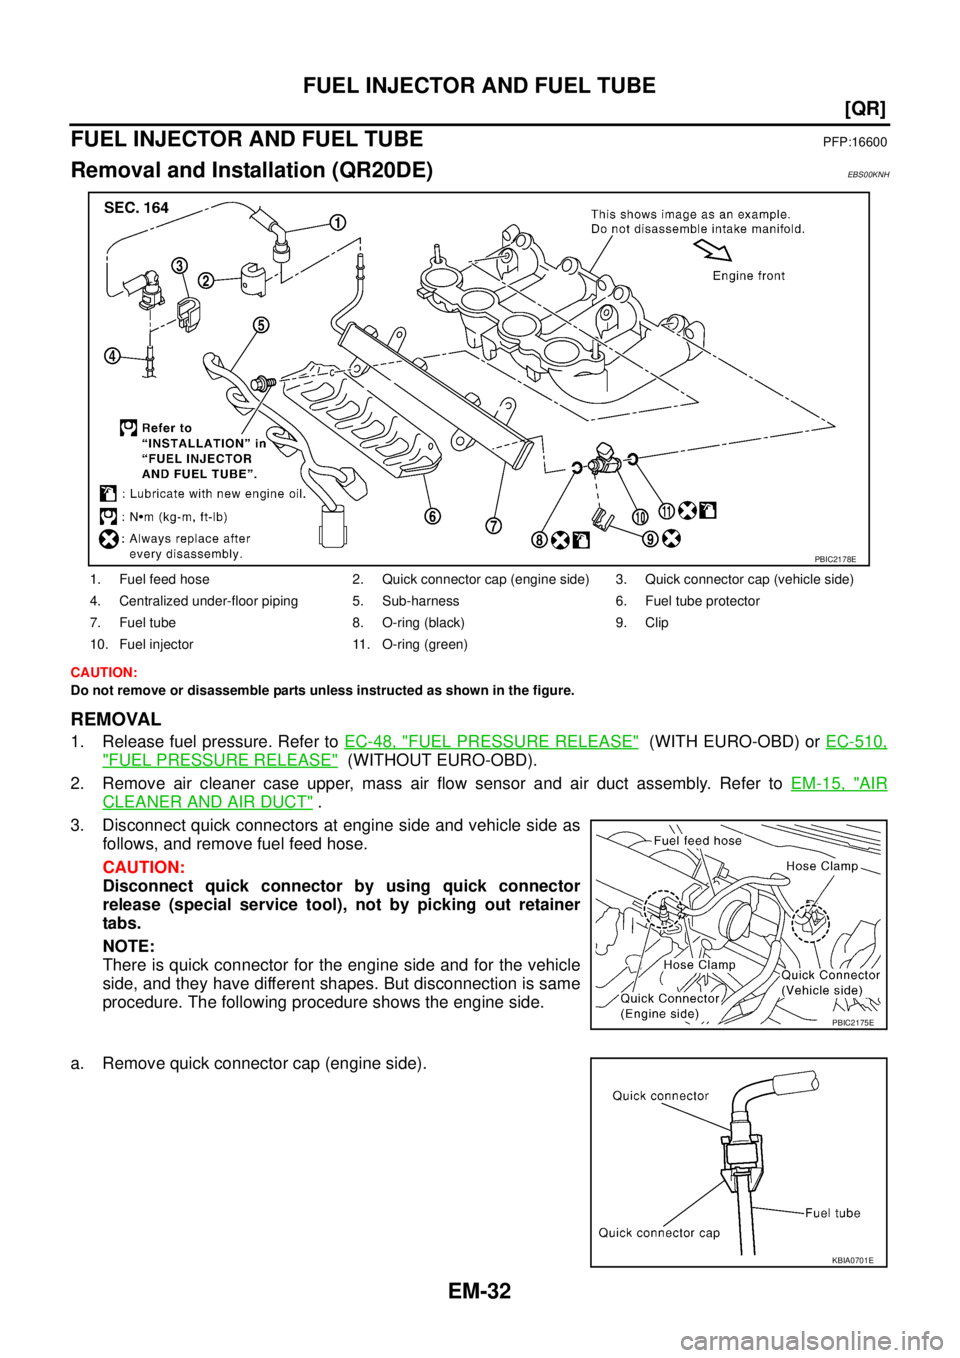 NISSAN X-TRAIL 2003  Service Repair Manual EM-32
[QR]
FUEL INJECTOR AND FUEL TUBE
 
FUEL INJECTOR AND FUEL TUBEPFP:16600
Removal and Installation (QR20DE)EBS00KNH
CAUTION:
Do not remove or disassemble parts unless instructed as shown in the fi